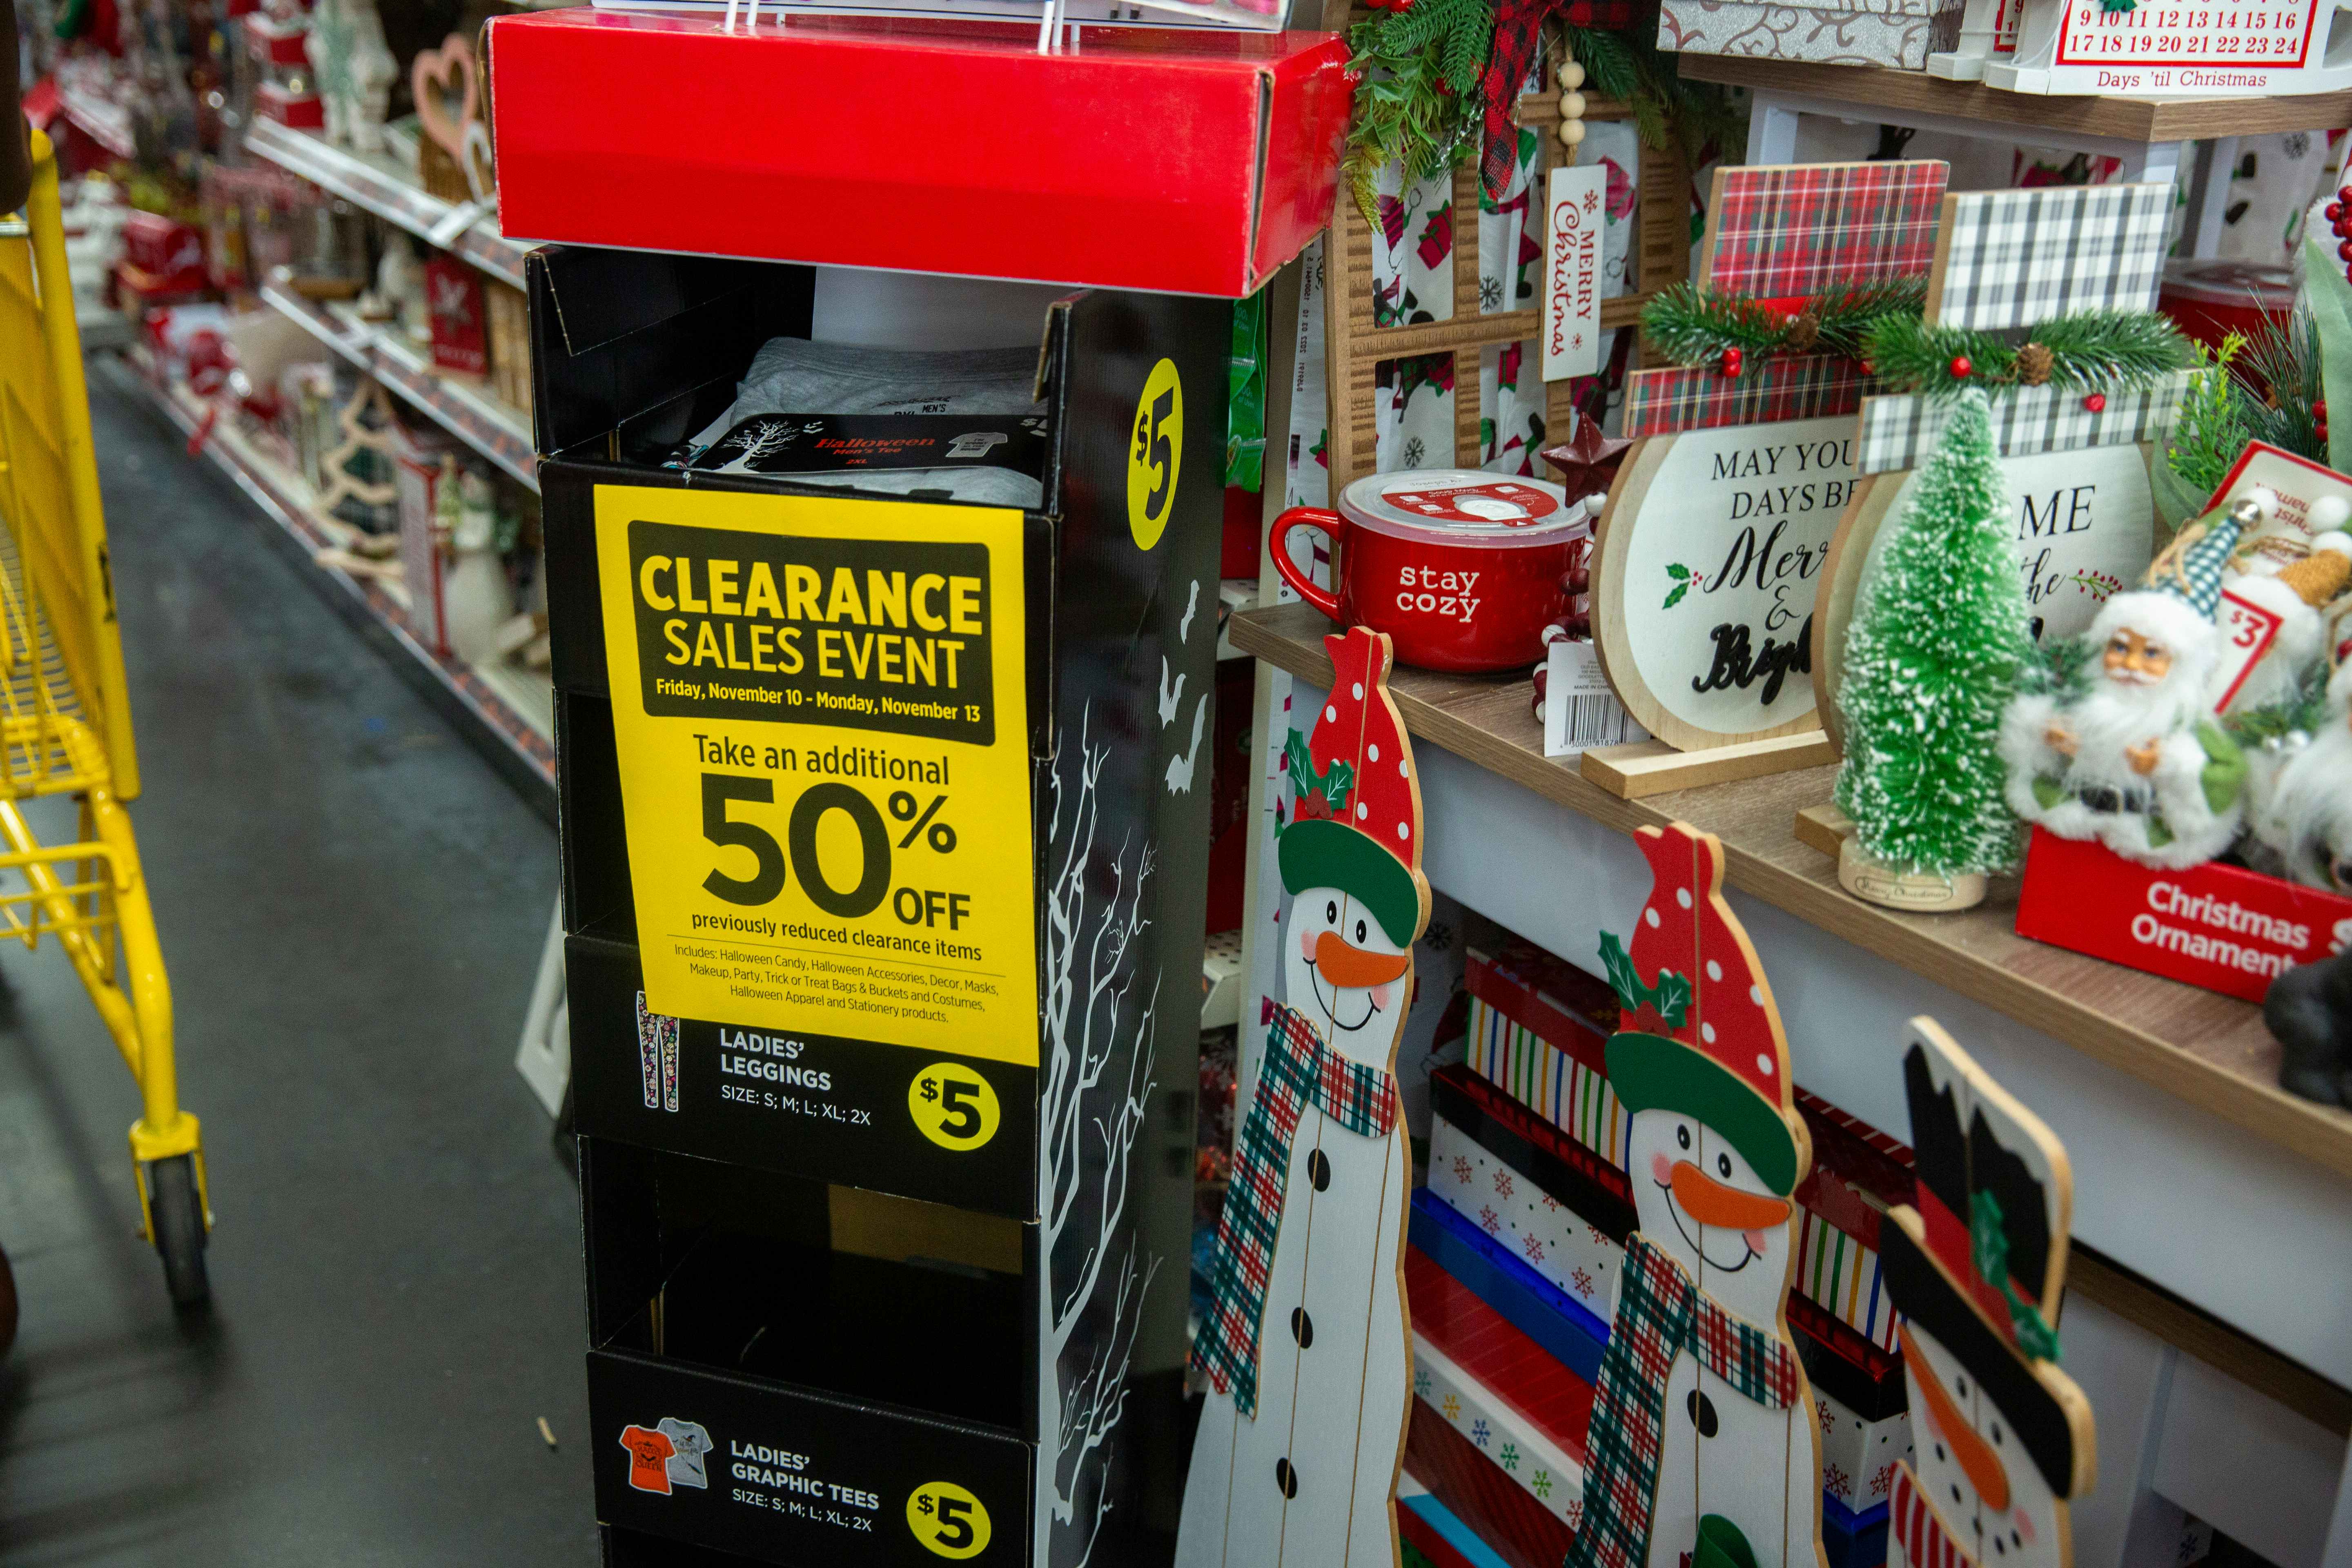 Dollar General Offers Holiday Food Deals Including Discounts, Coupons and  DG Cash Back — Here's How To Save